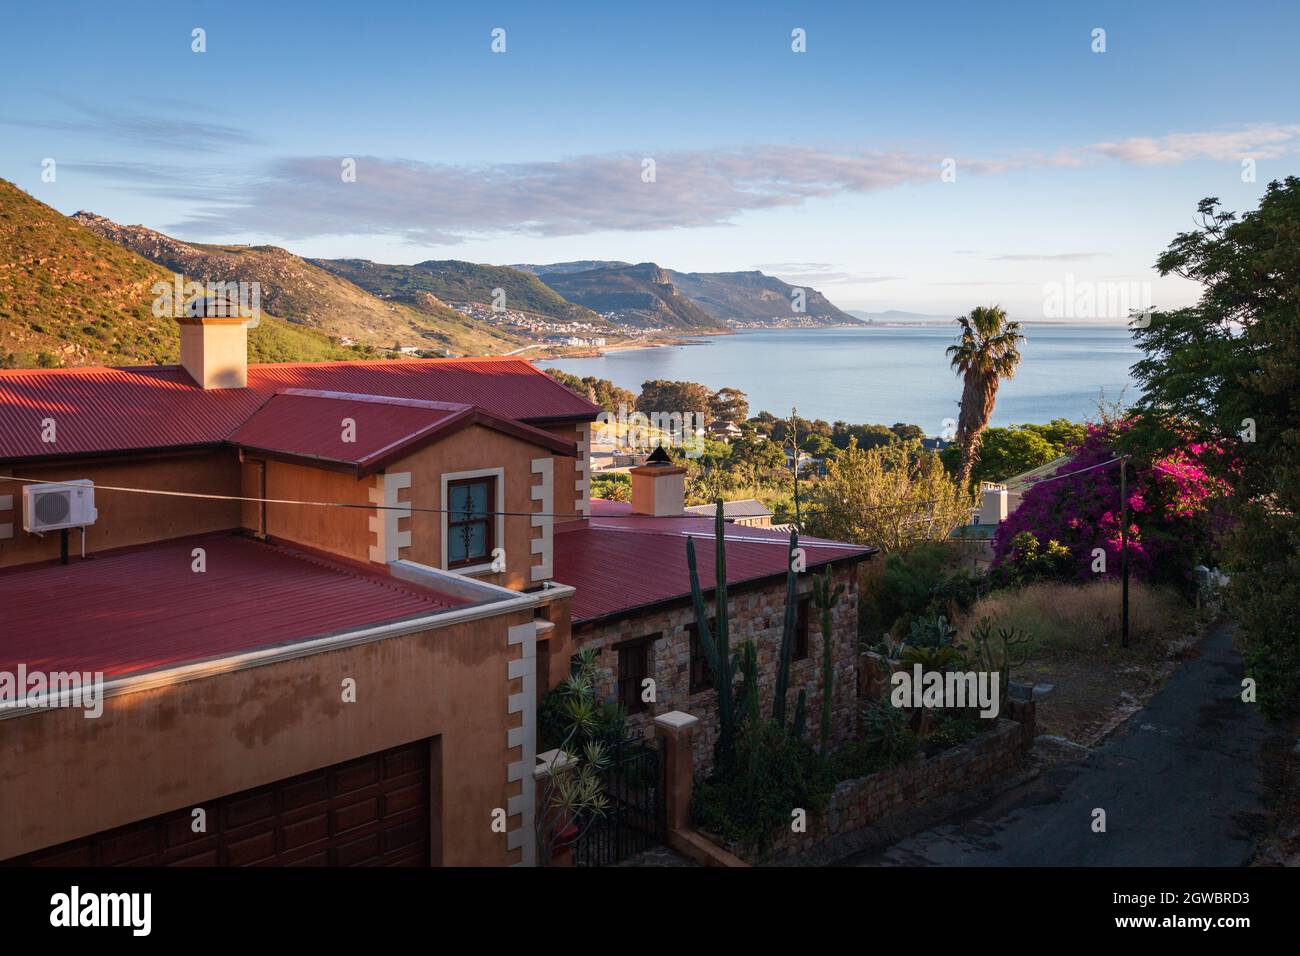 Scenic View Over Houses In Simons Town To False Bay And Kalk Bay In The Morning Stock Photo